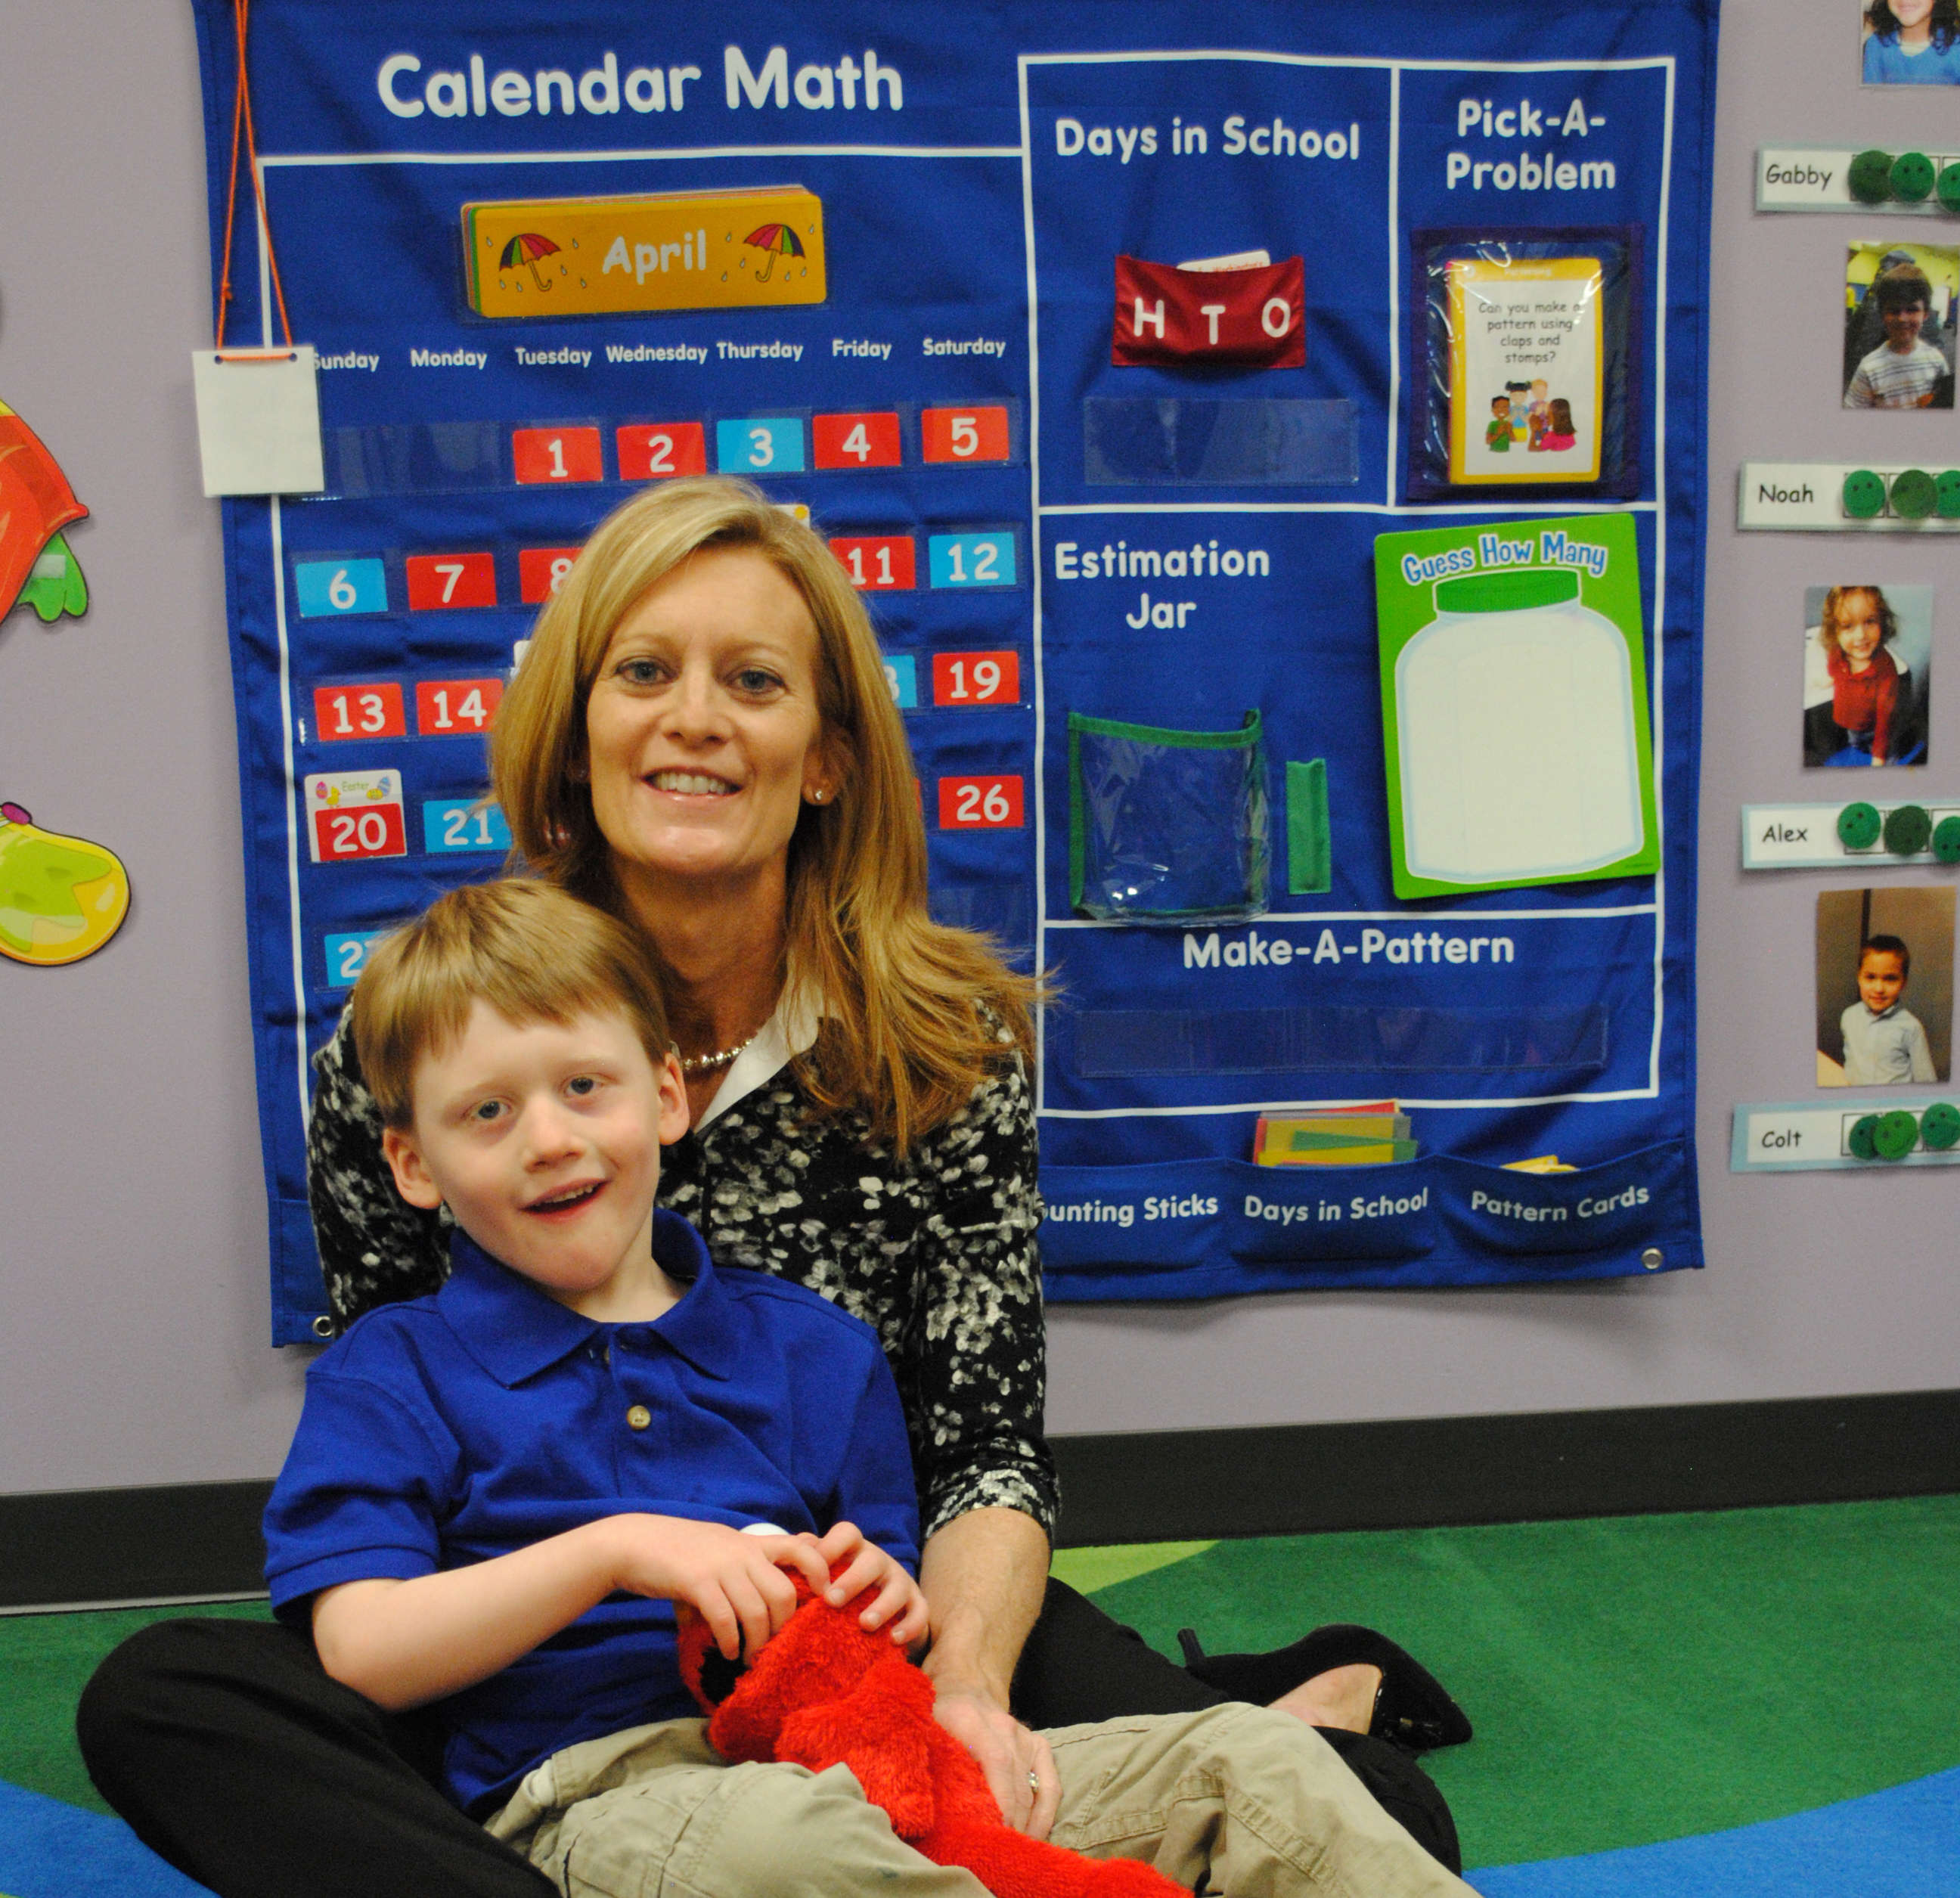 Kathy Rokita takes her son Teddy to school at the Little Star Center in Carmel, where he gets one-on-one therapeutic assistance. (Photo by Adam Aasen)